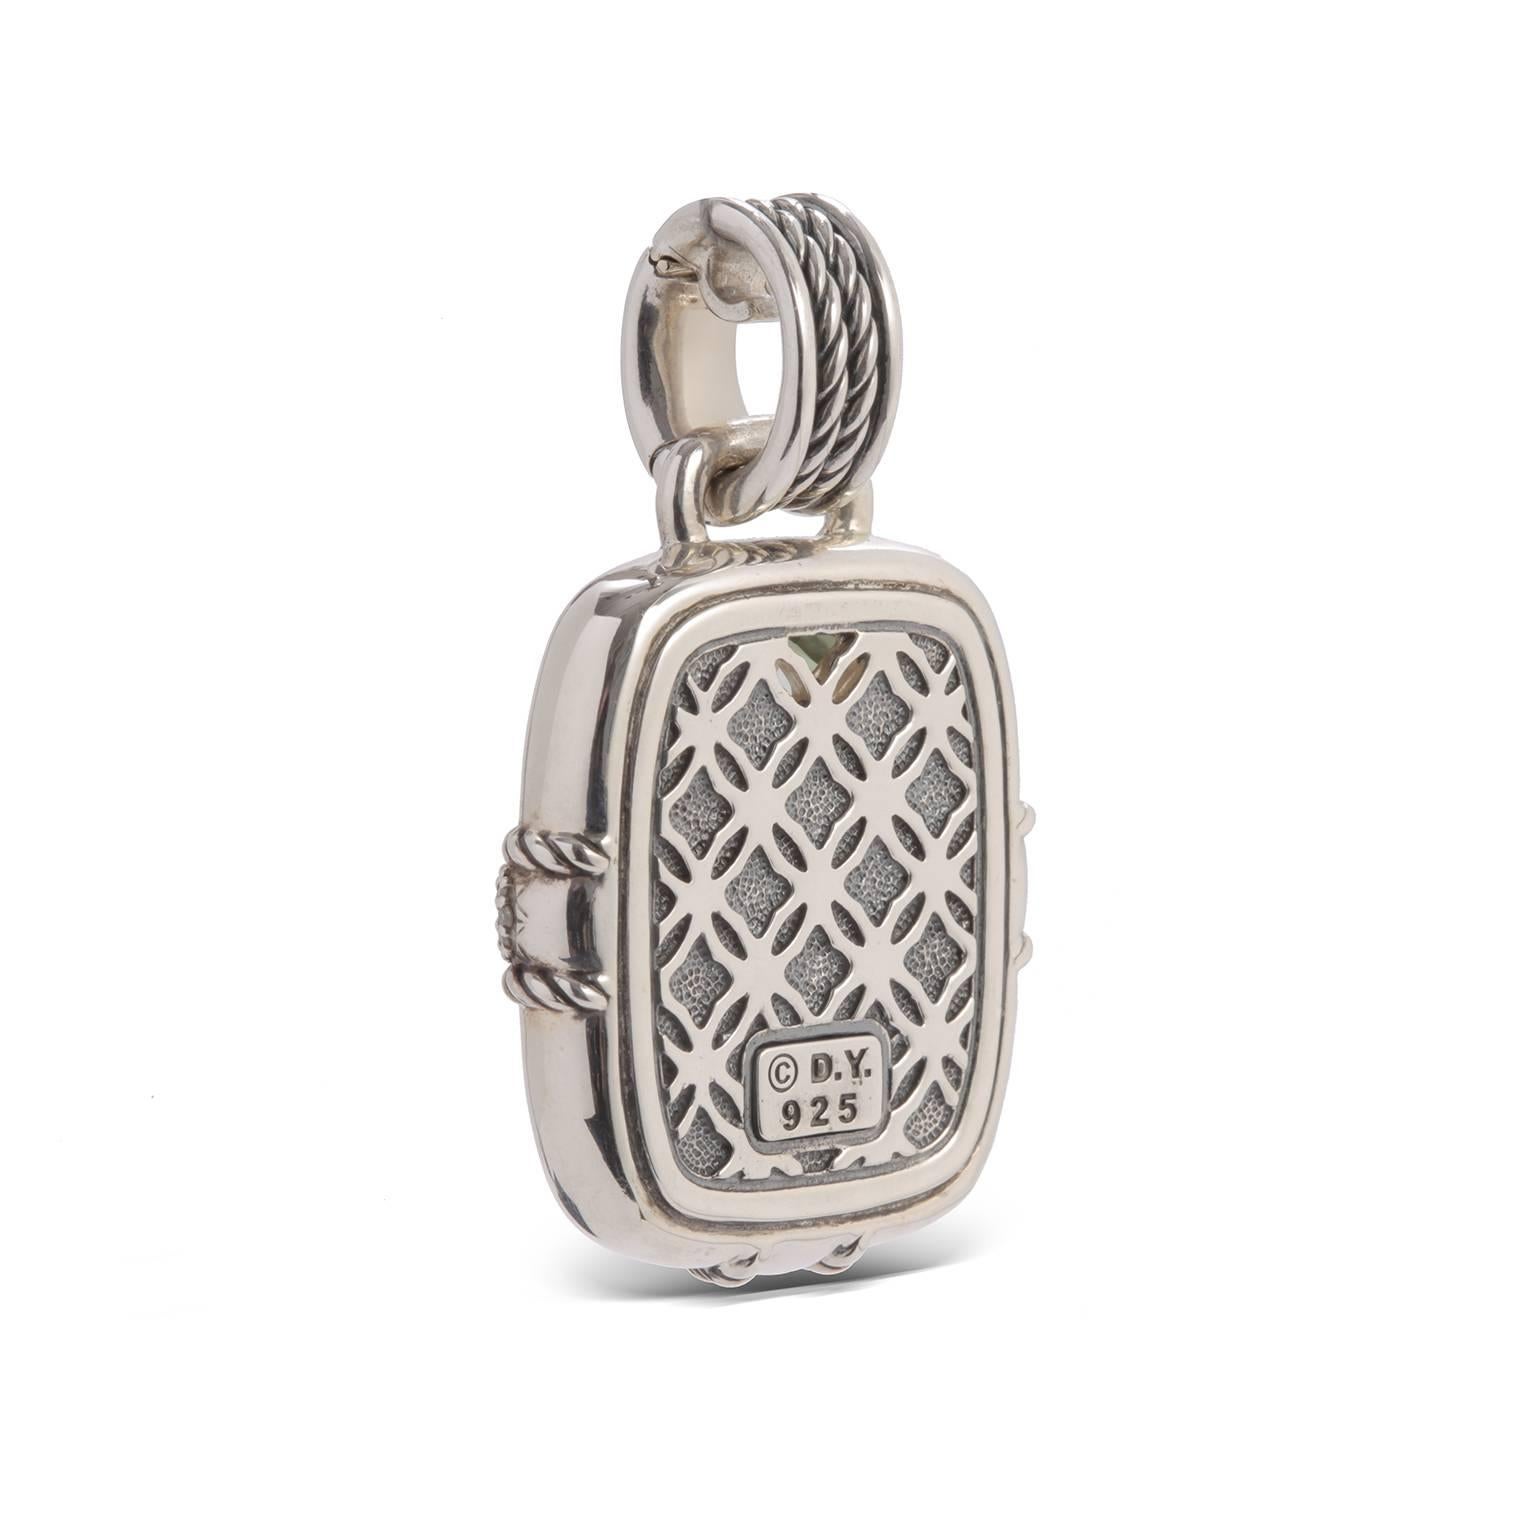 Previously loved sterling silver David Yurman pendant featuring a cushion cut and checkerboard prasiolite at center with round brilliant diamonds pave set.

